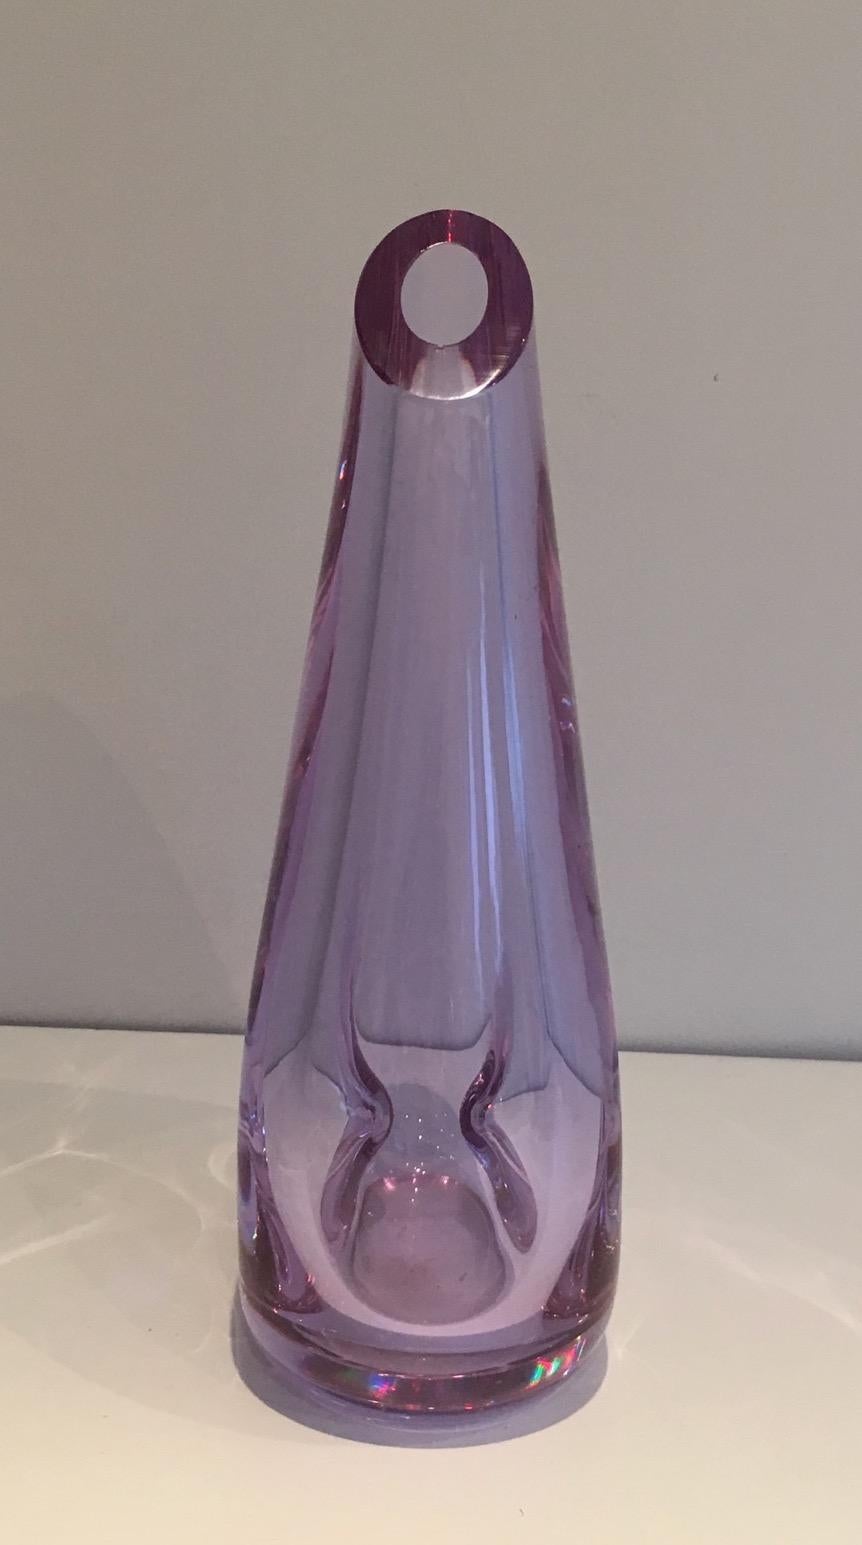 This vase is ma de of a glass purplish-colored pear-shaped. This is a French work. Circa 1970.